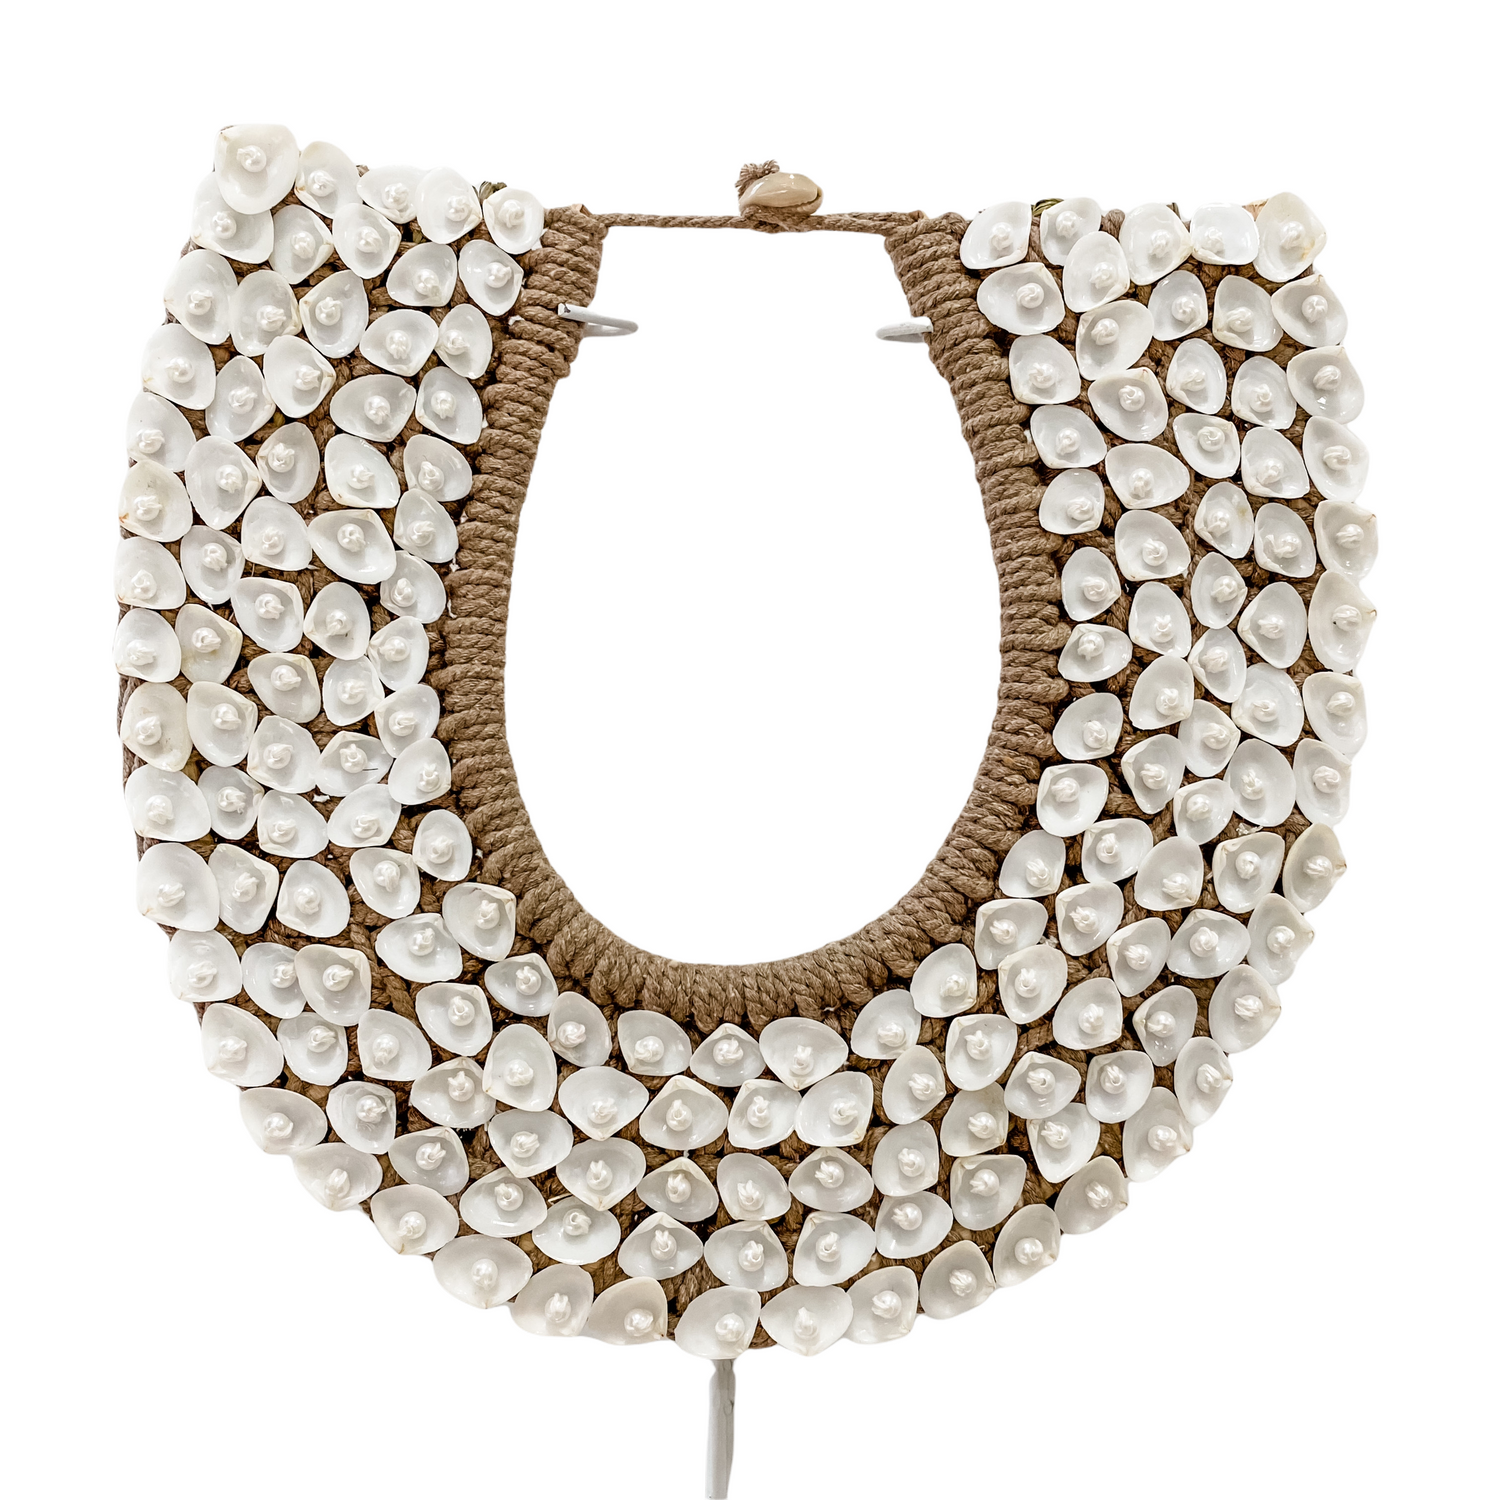 White Oliana Shell Necklace on Stand Beach Decor